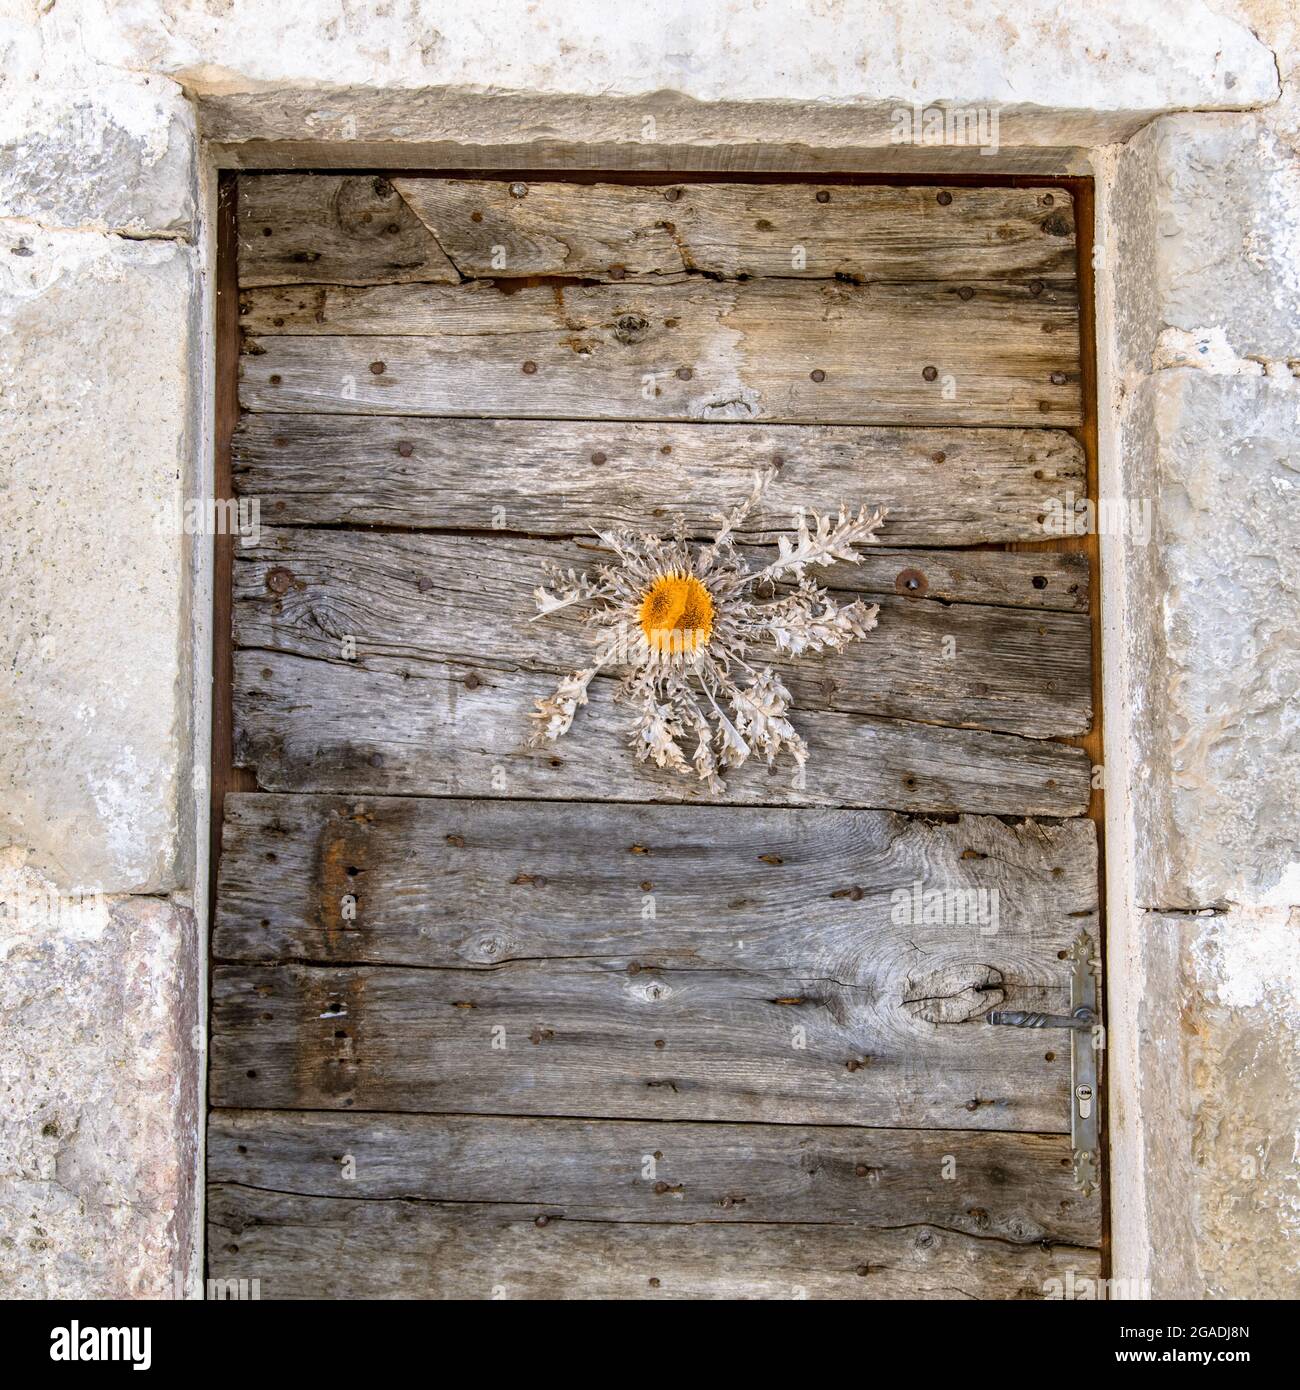 Carline thisle on a door. Traditional decoration, protection for bad spirits. Cevennes. France. Stock Photo